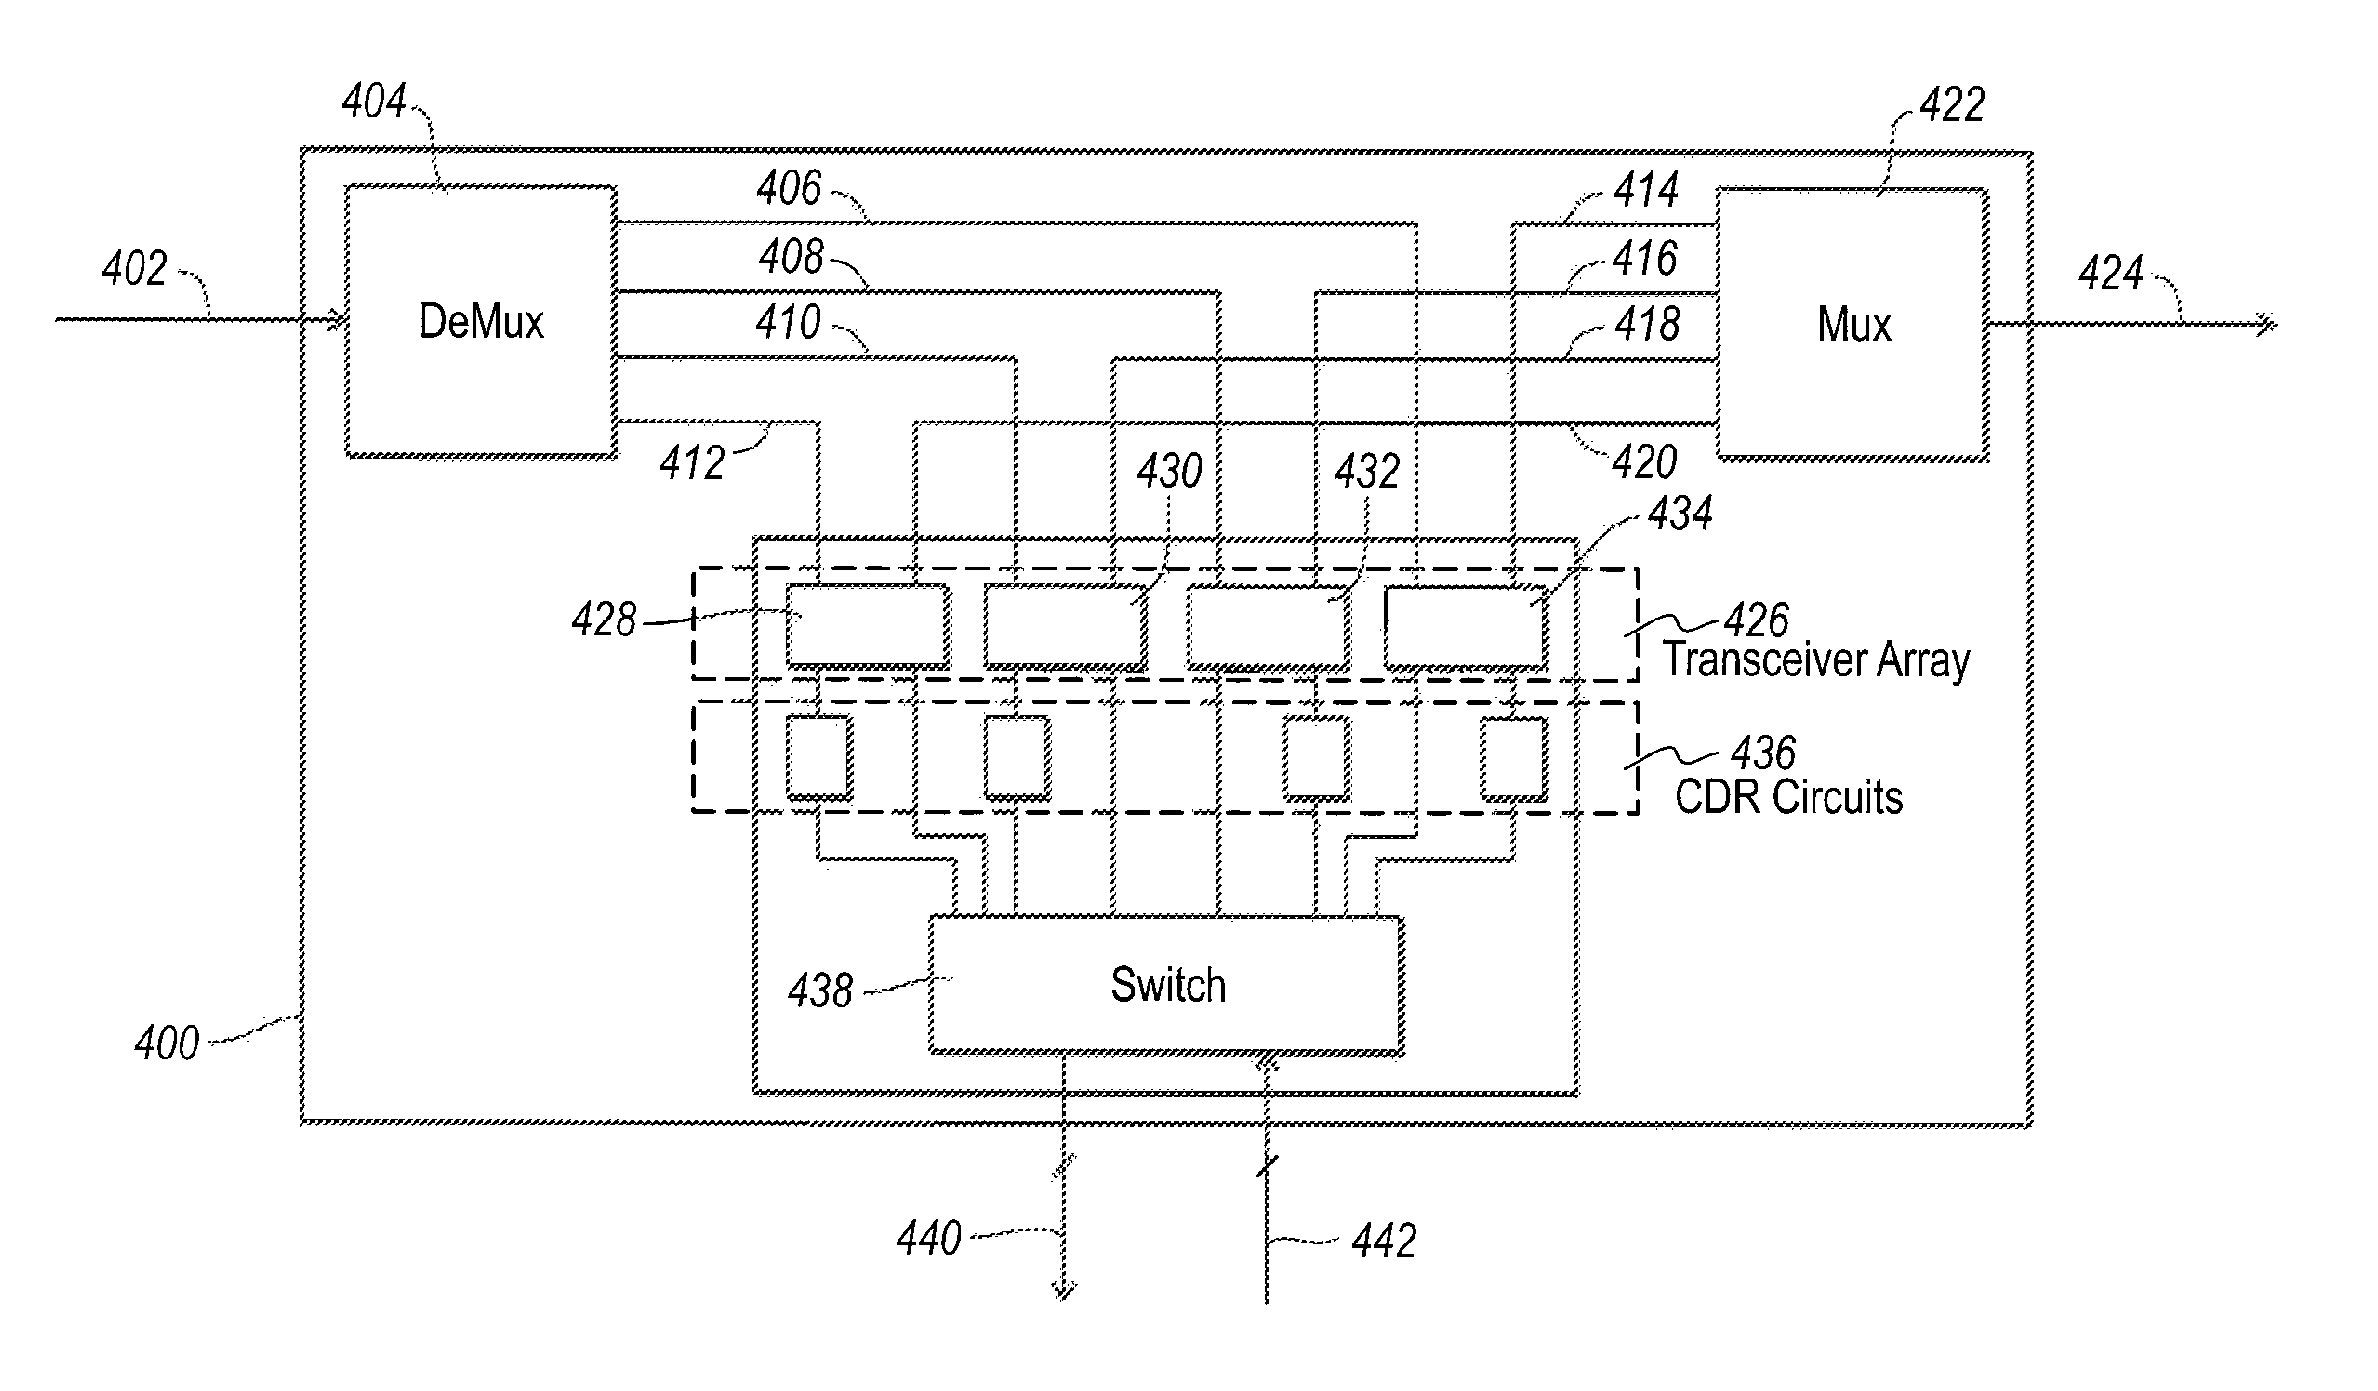 Scalable transceiver based repeater